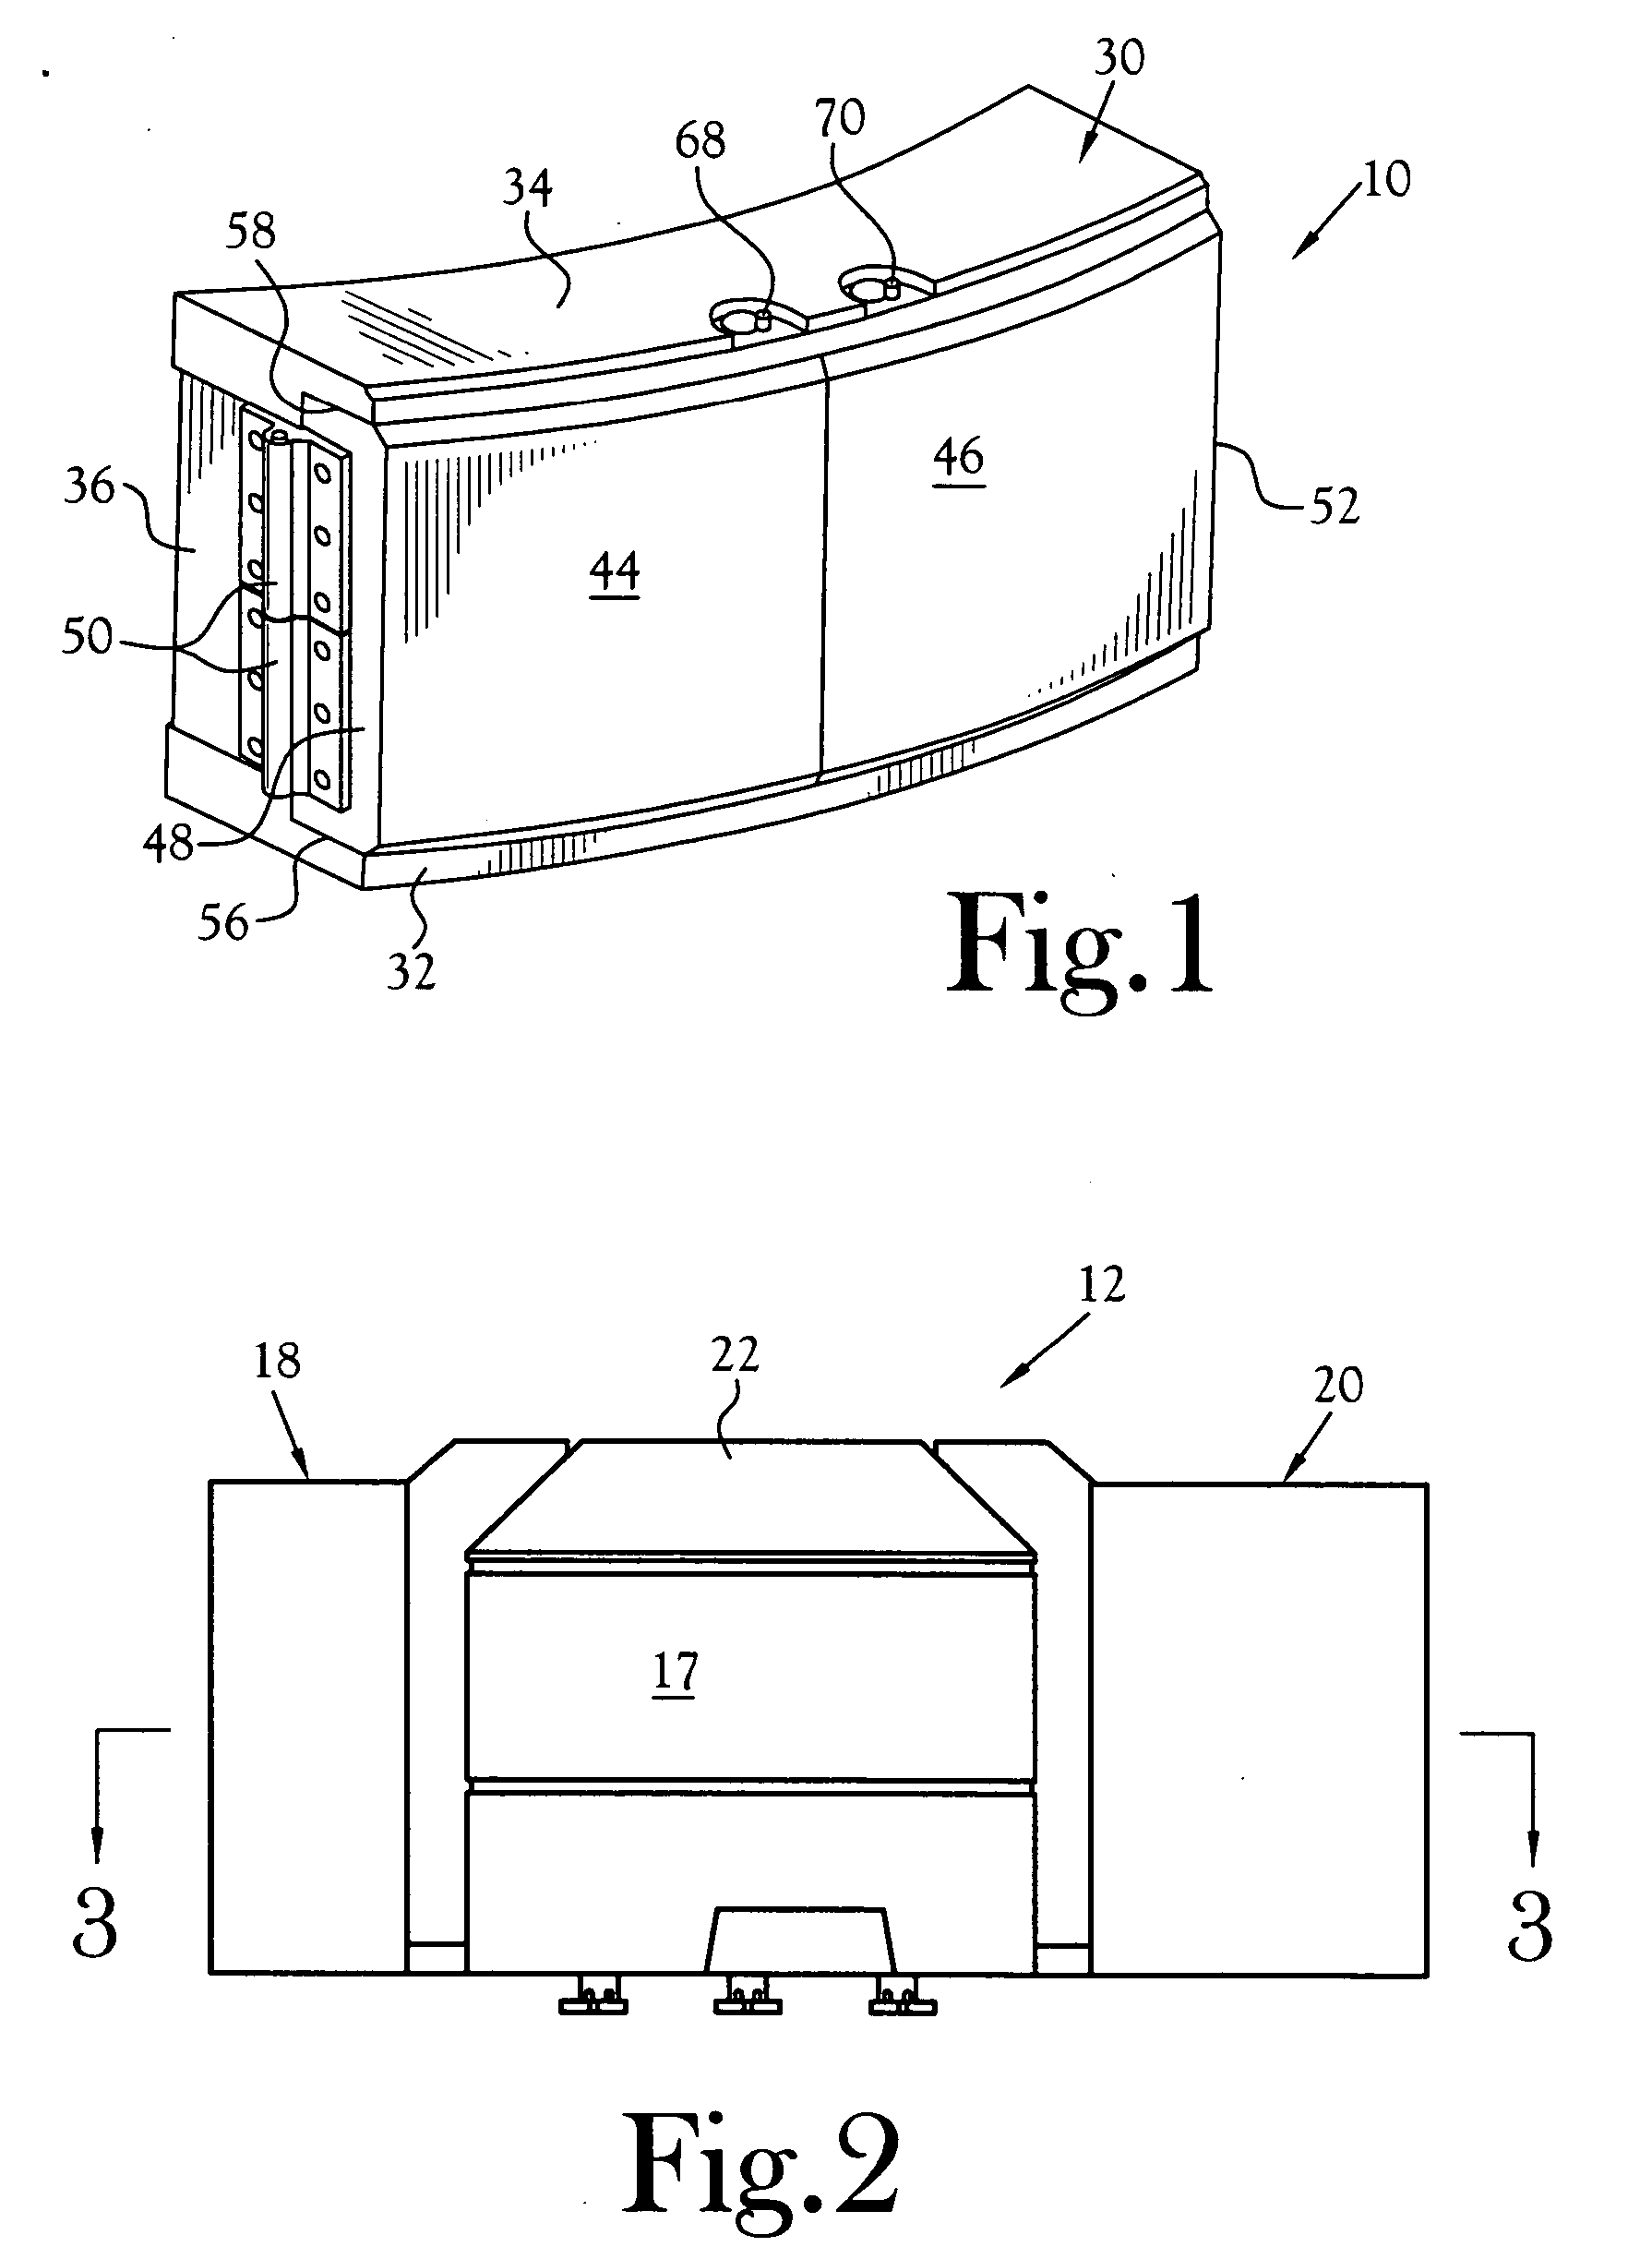 Closure for shielding the targeting assembly of a particle accelerator